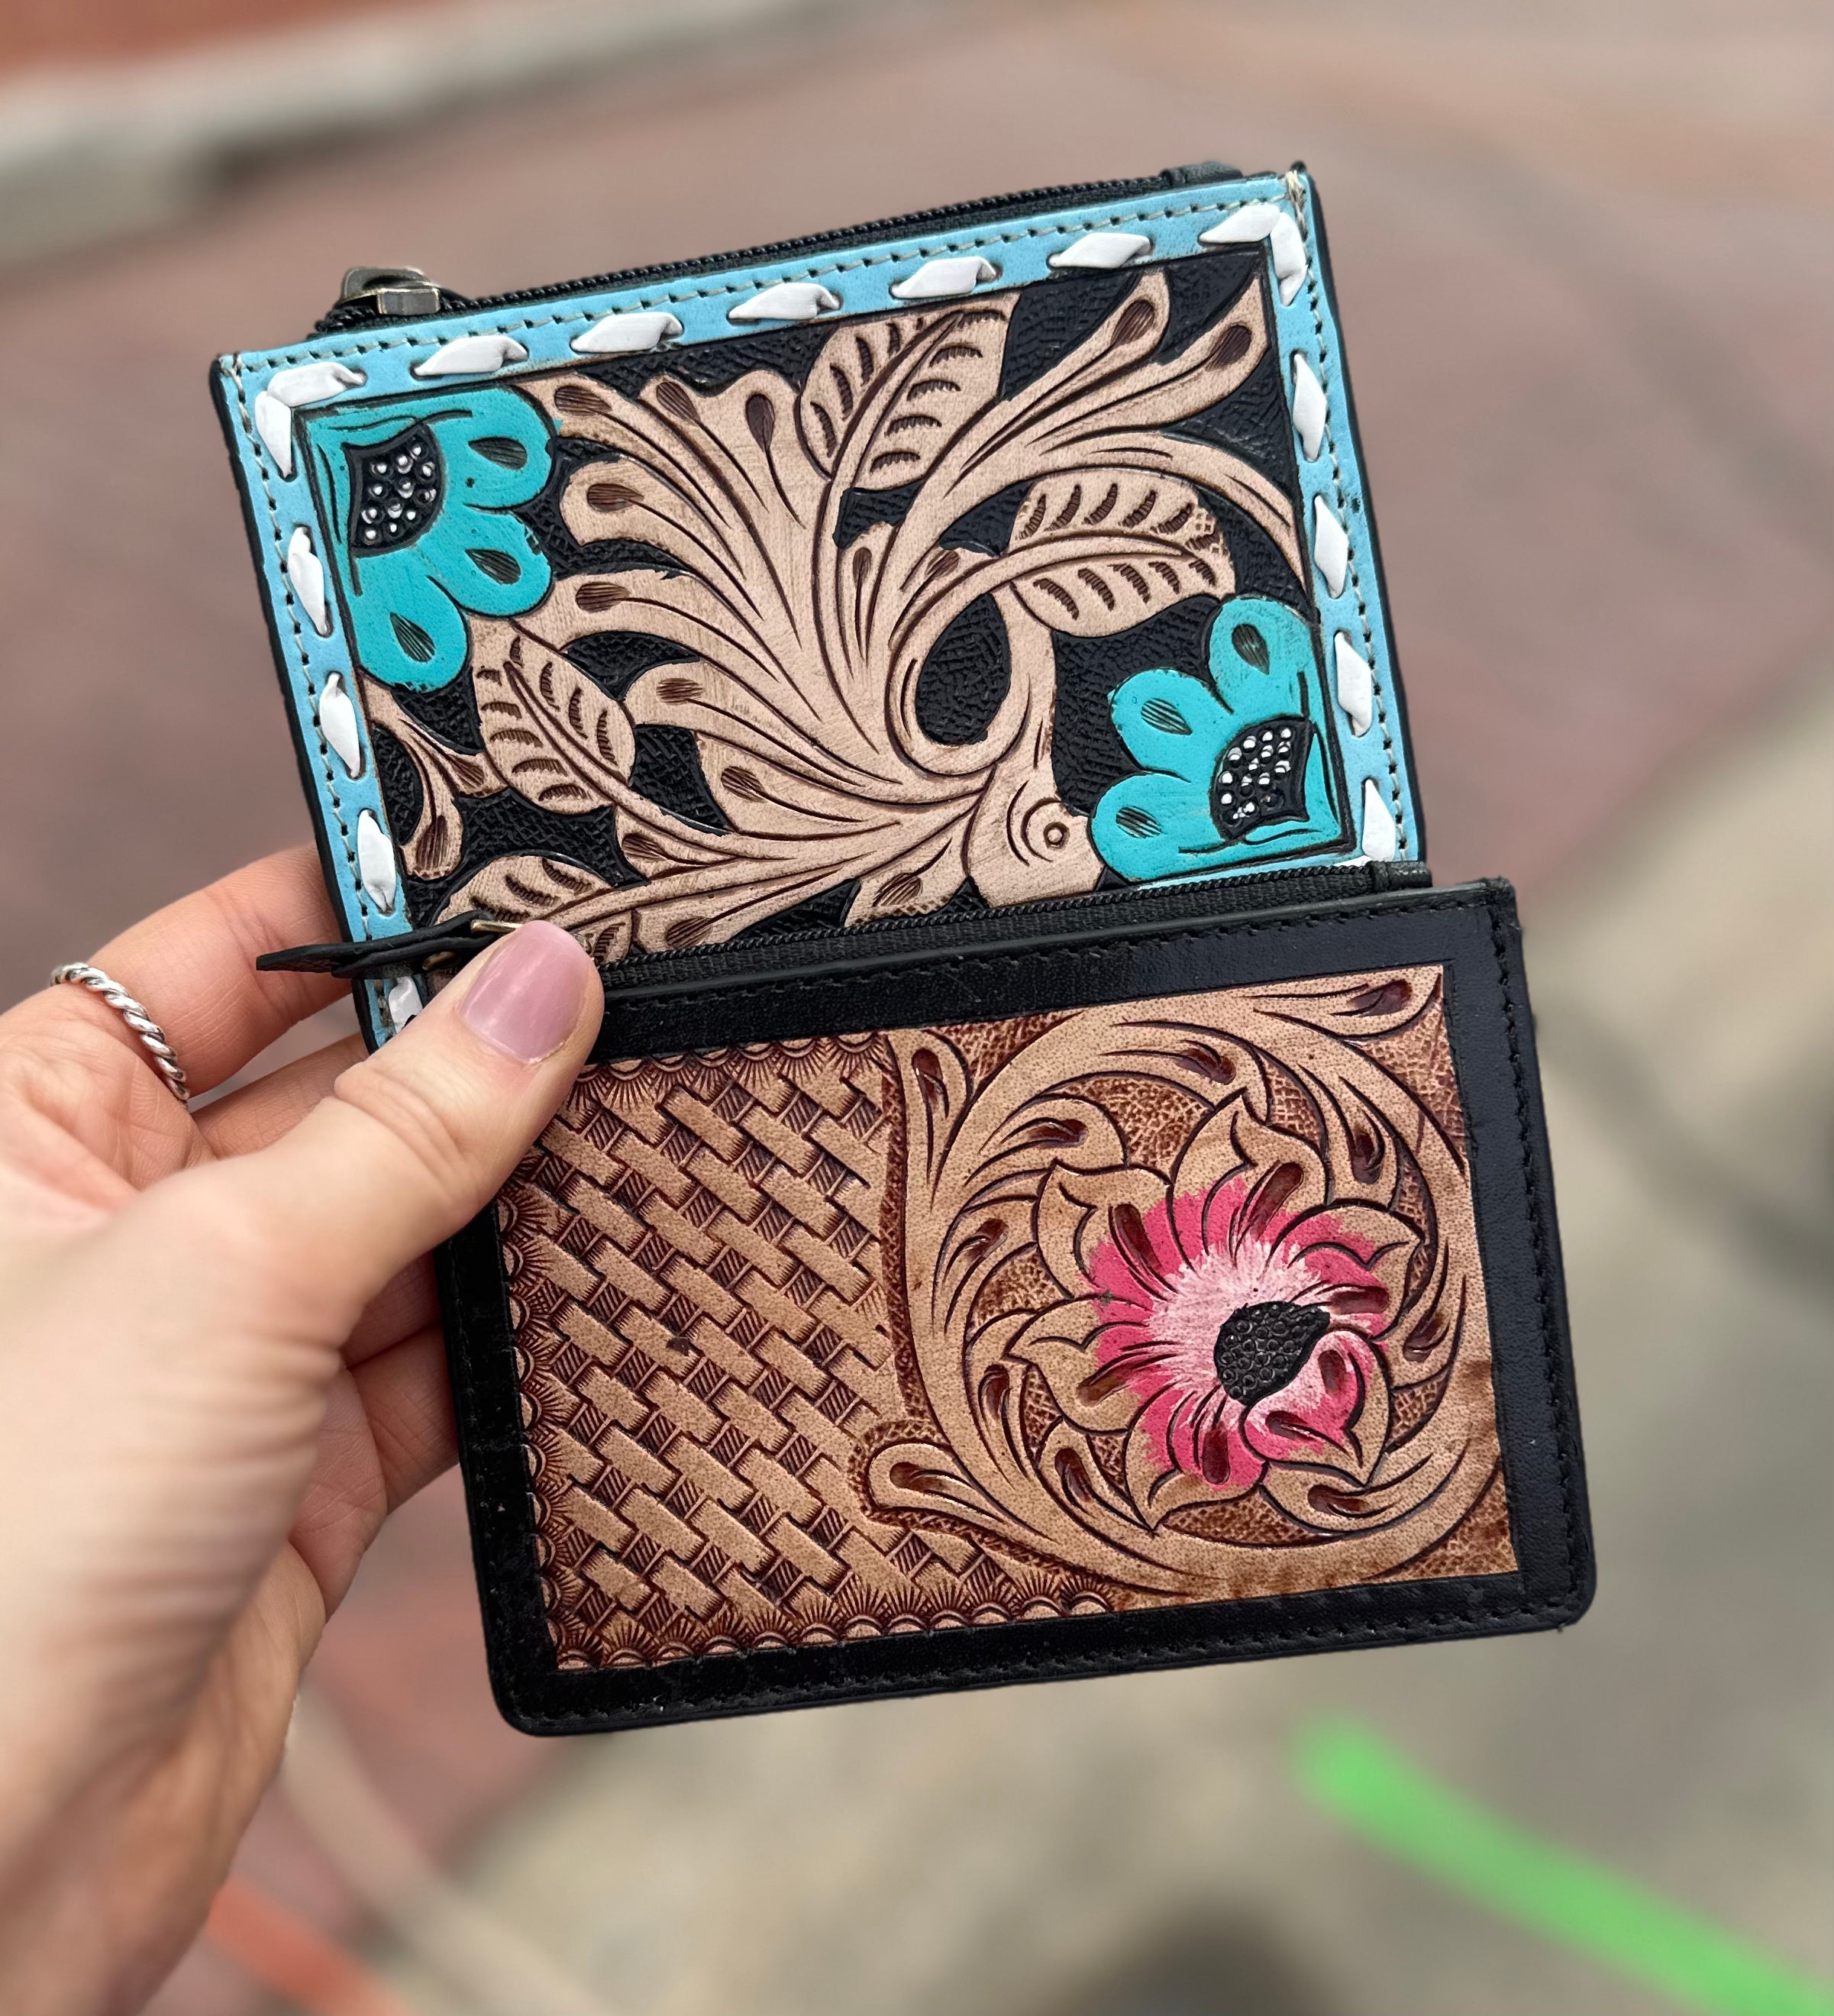 Tooled Leather Credit Card Holder